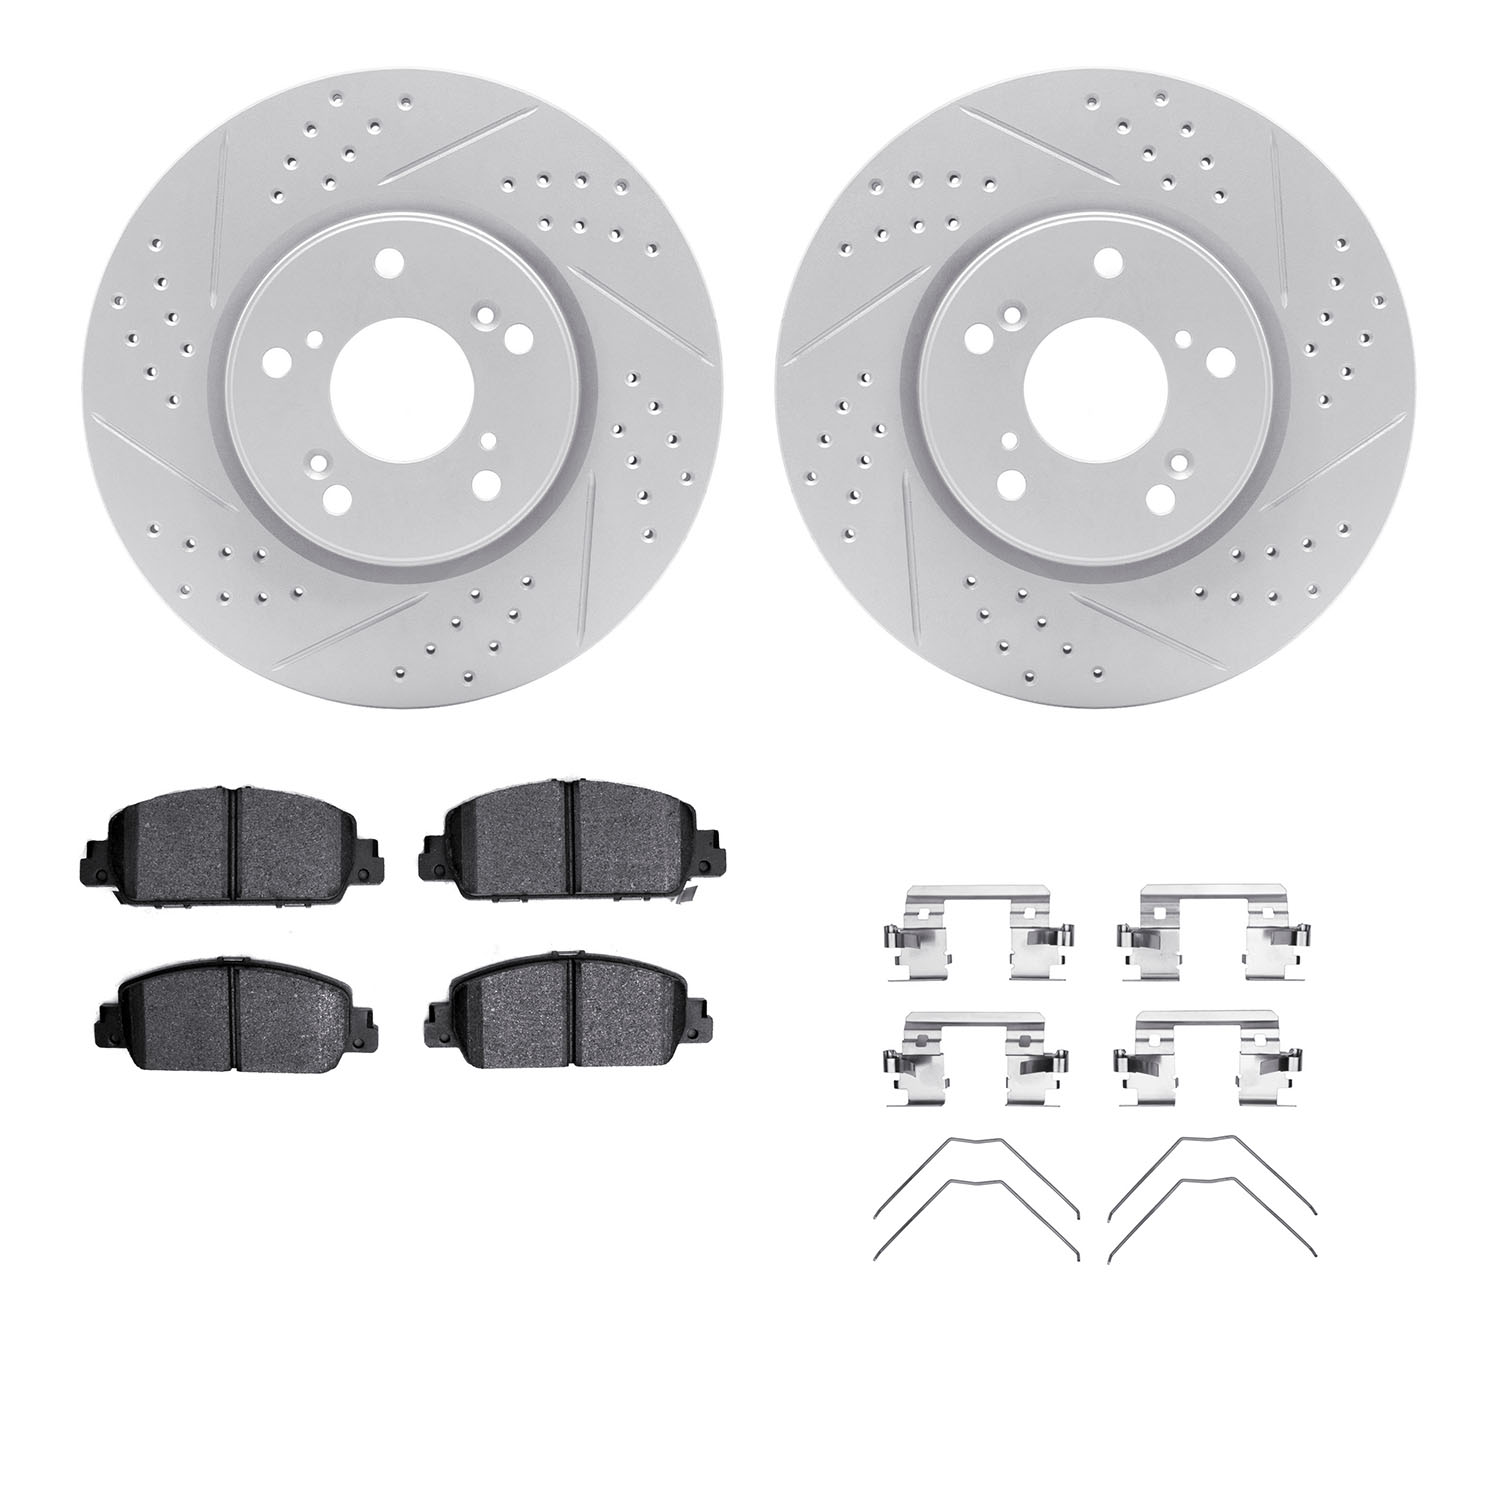 2512-59044 Geoperformance Drilled/Slotted Rotors w/5000 Advanced Brake Pads Kit & Hardware, Fits Select Acura/Honda, Position: F